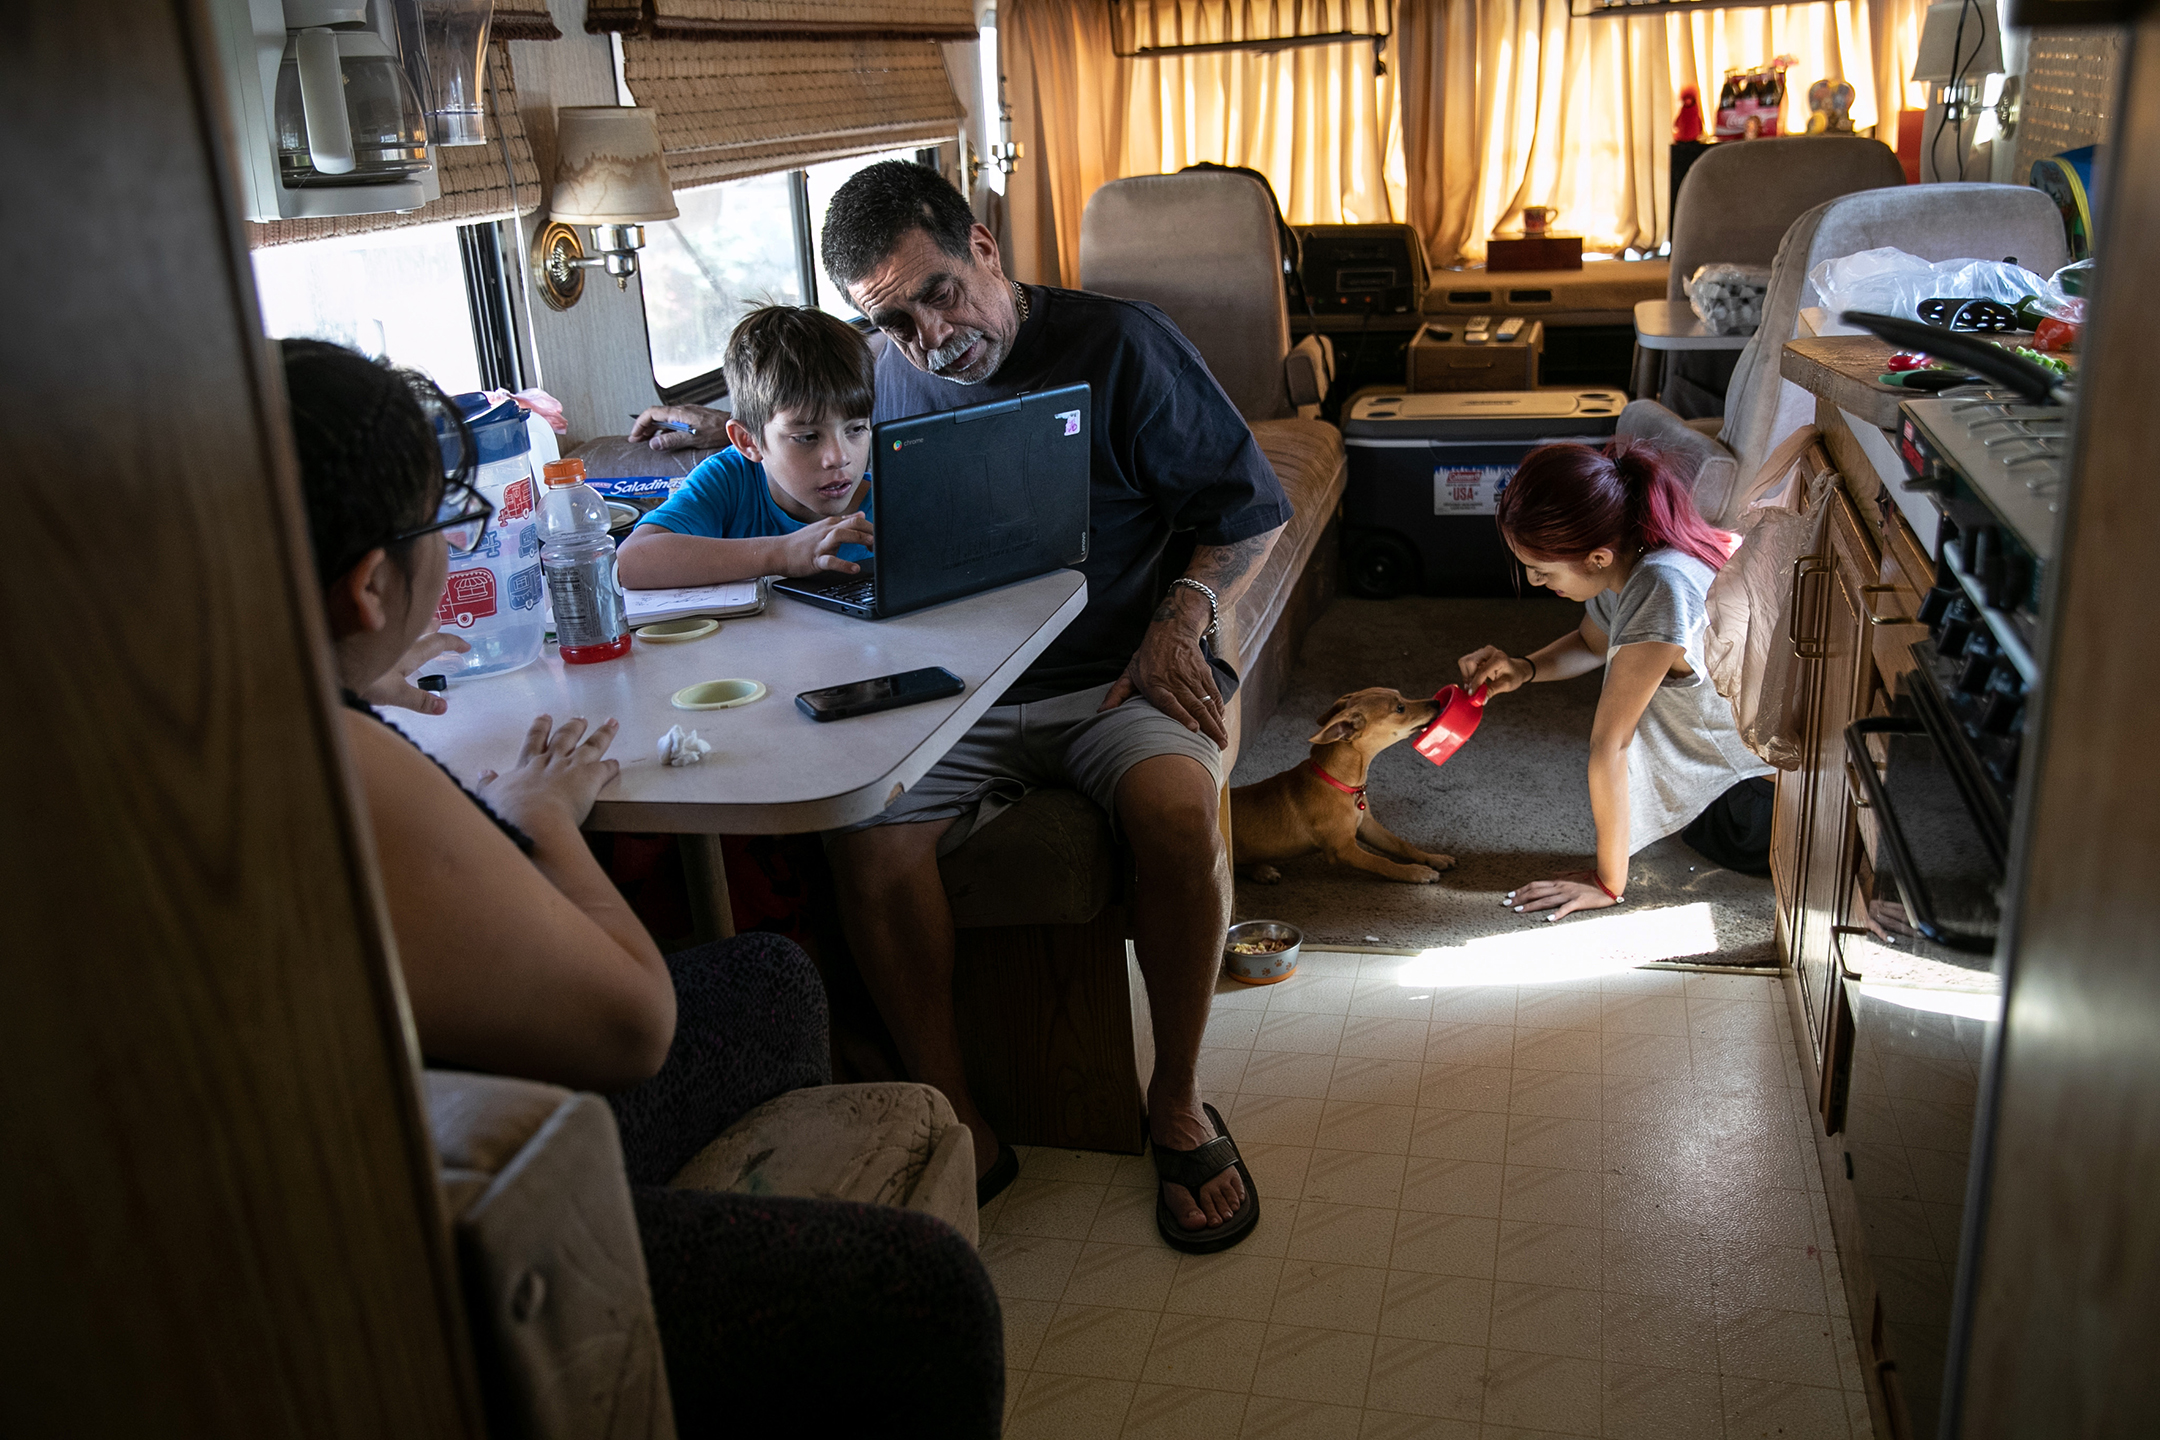 Older man helps a young boy working on a laptop in a cluttered RV